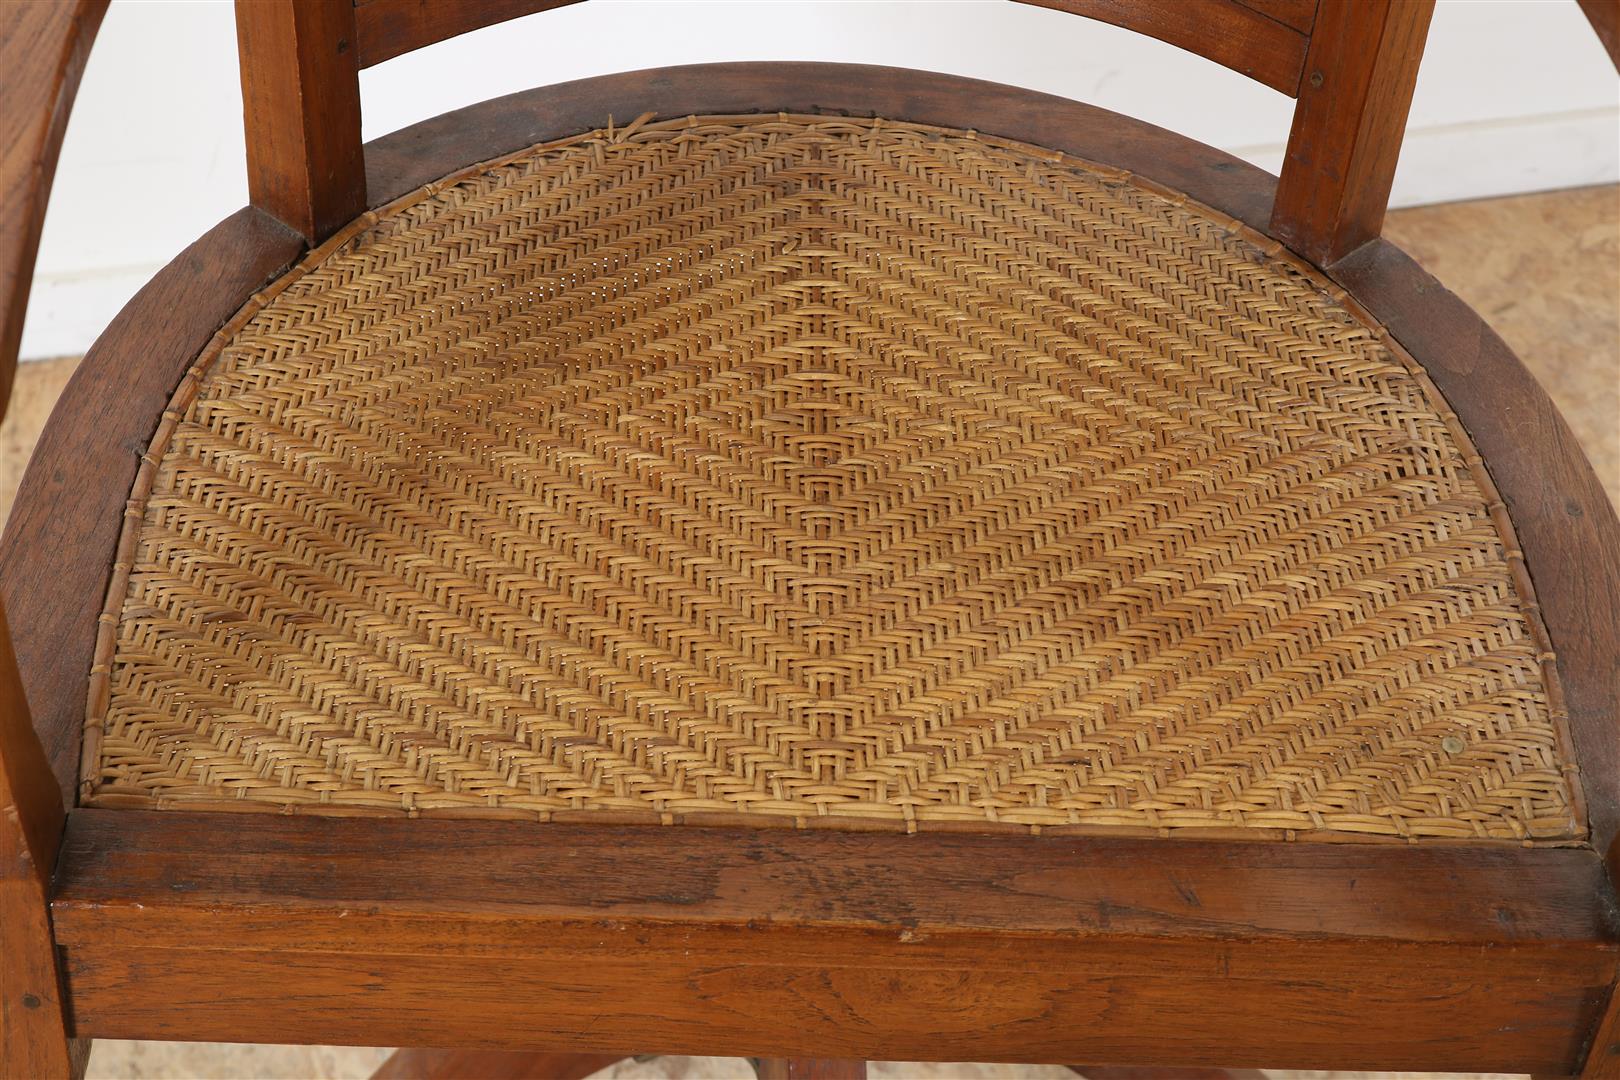 Teak Art Deco office chair with woven wicker seat, Indonesia ca. 1925. - Image 3 of 4